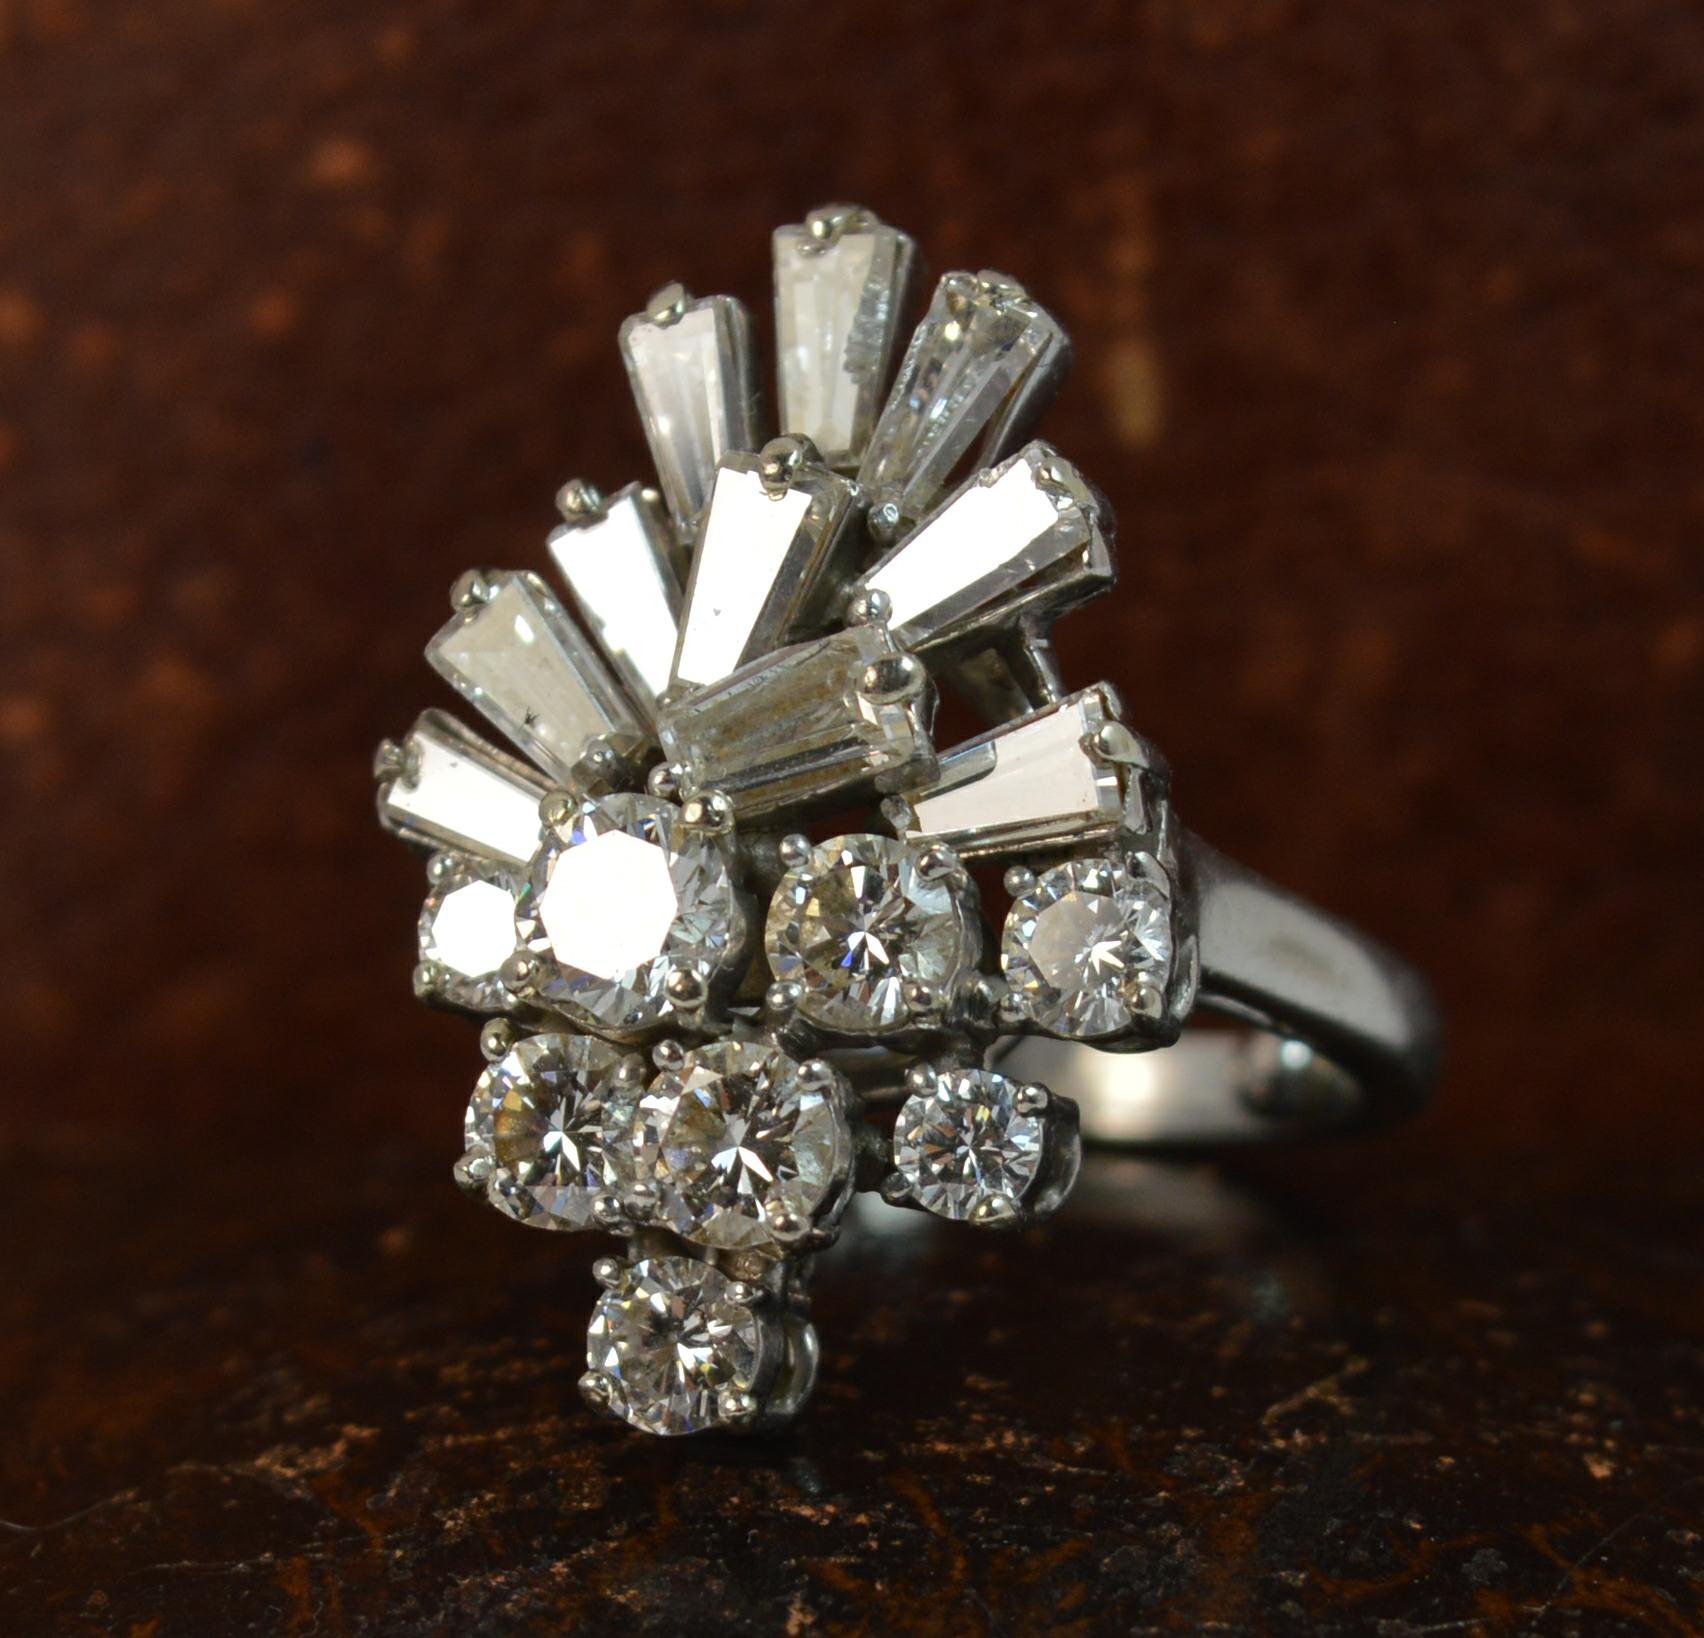 A Platinum and Diamond set ladies cluster cocktail ring. c1975.
SIZE ; L UK, 5 3/4 US, with balls which can be removed, can be sized
Designed by the famous Kutchinsky, renowned for large impression bold pieces of jewellery.
Set with 8 round